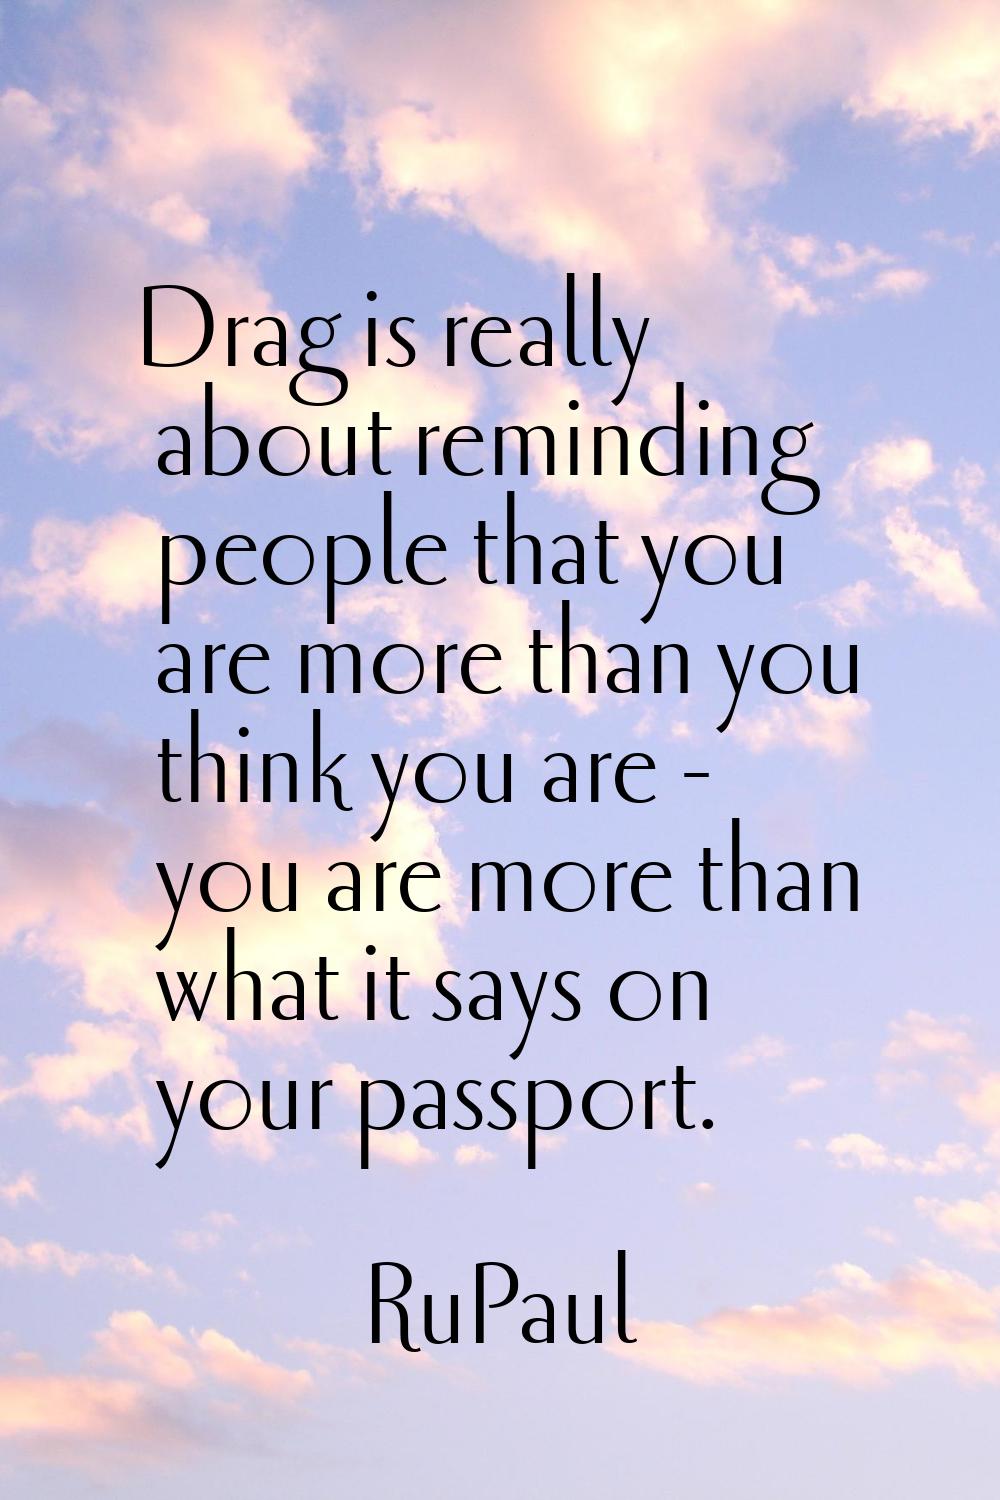 Drag is really about reminding people that you are more than you think you are - you are more than 